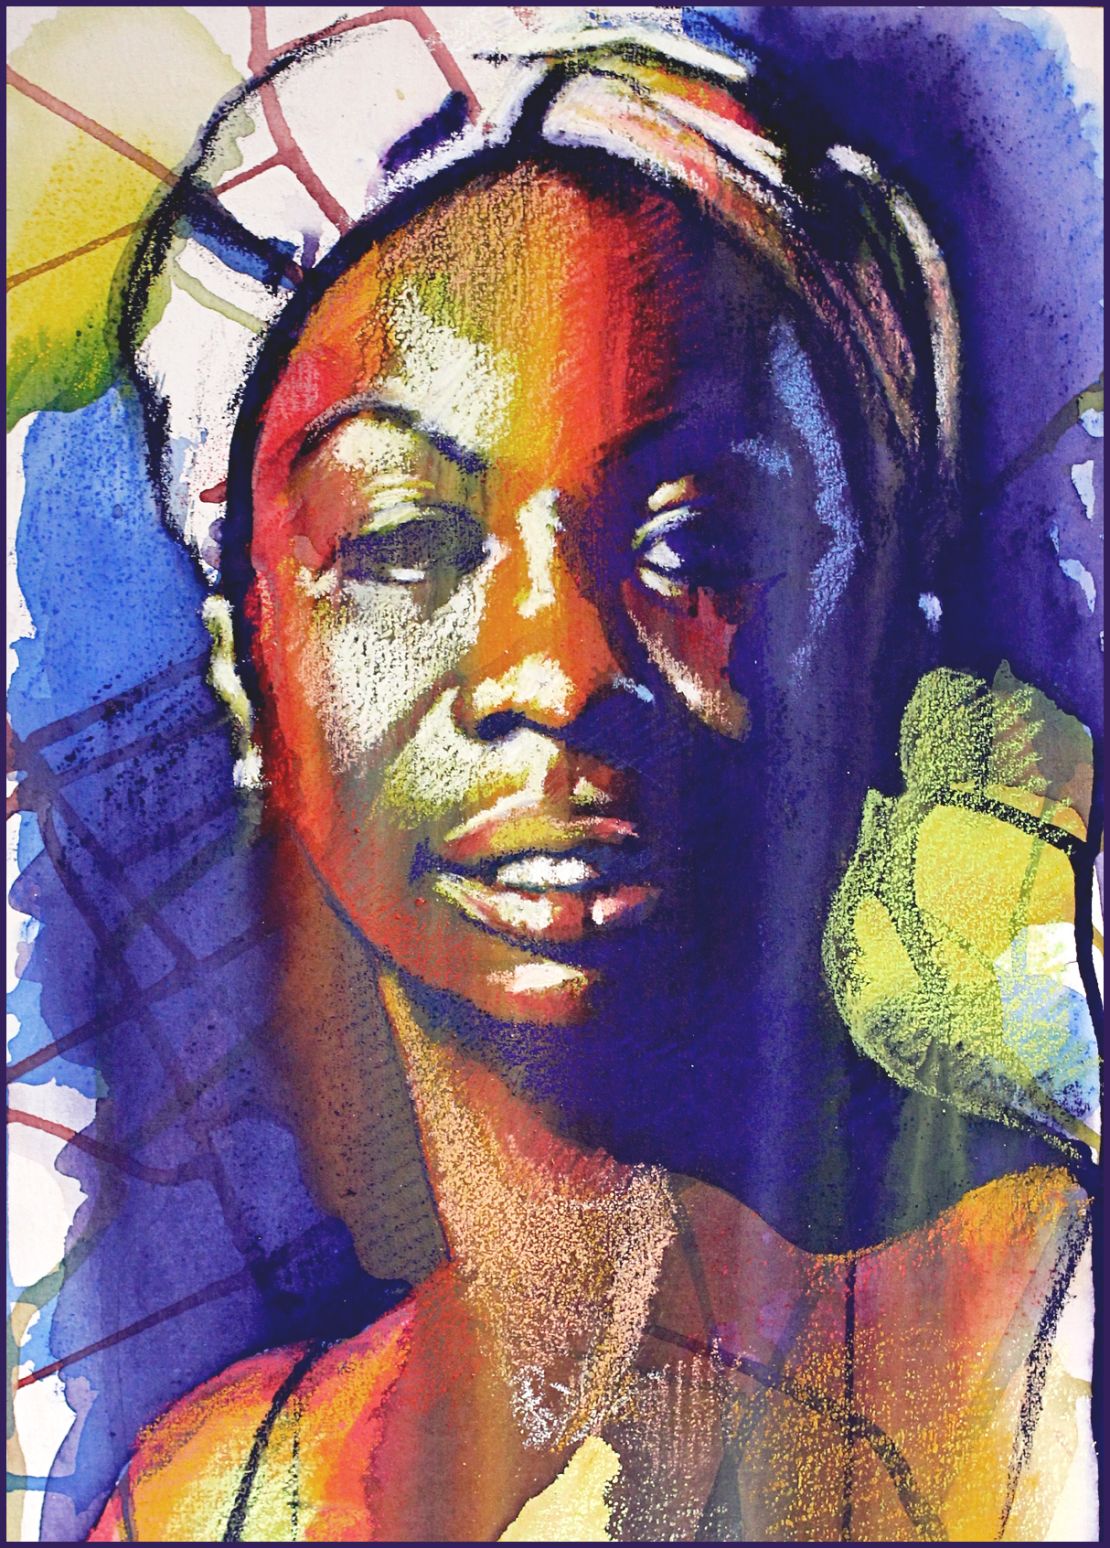 Baltimore artist Ernest Shaw has painted Nina Simone numerous times.